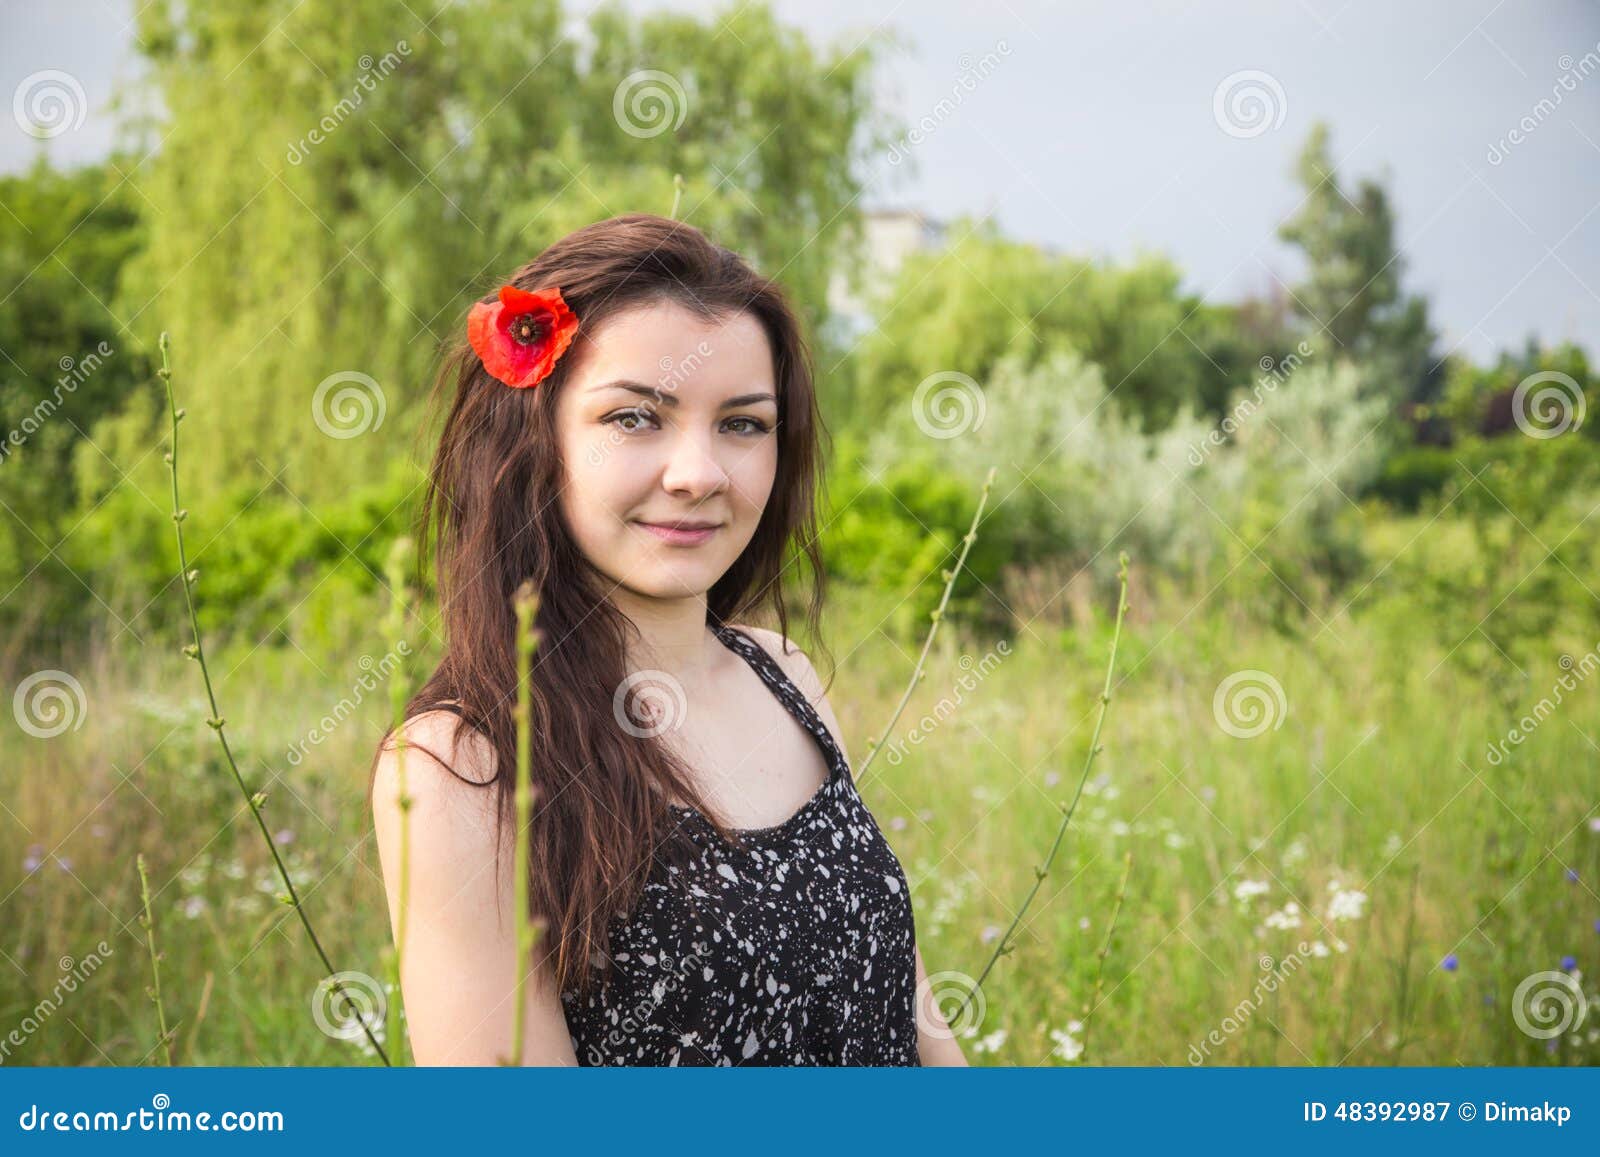 Girl with a Poppy in Her Hair Stock Image - Image of grass, orange ...